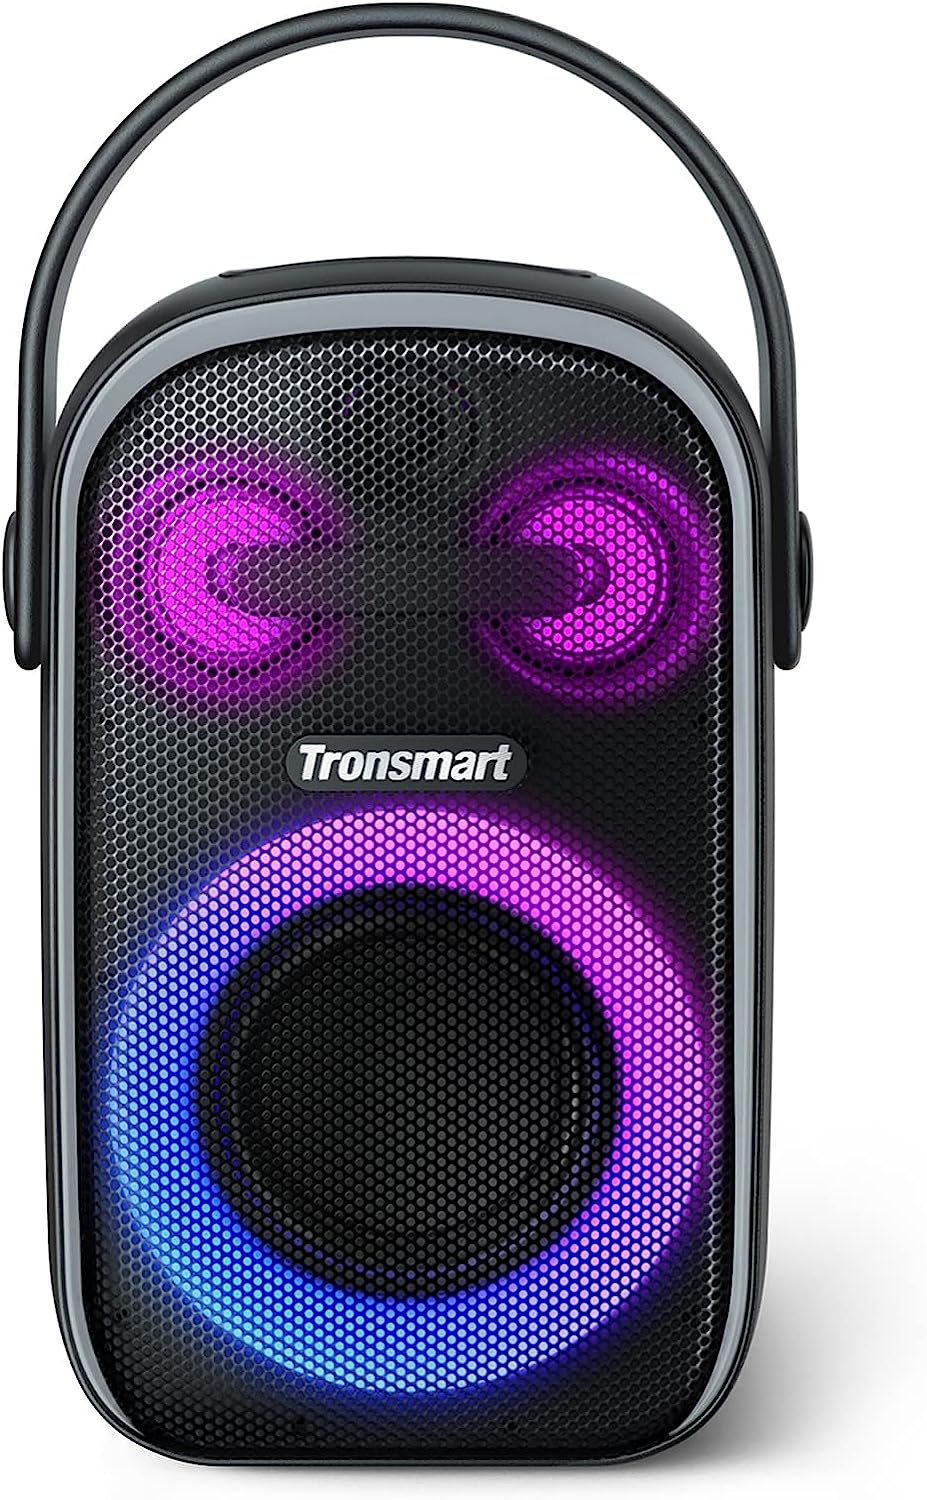 Tronsmart Halo 100 Portable Party Bluetooth Speaker, HIFI Sound Quality Subwoofer Bass to Pump Up Your Party.Wireless stereo pairing by APP,18H Playtime,IPX6 Waterproof,Suitable for party/home/outdoor